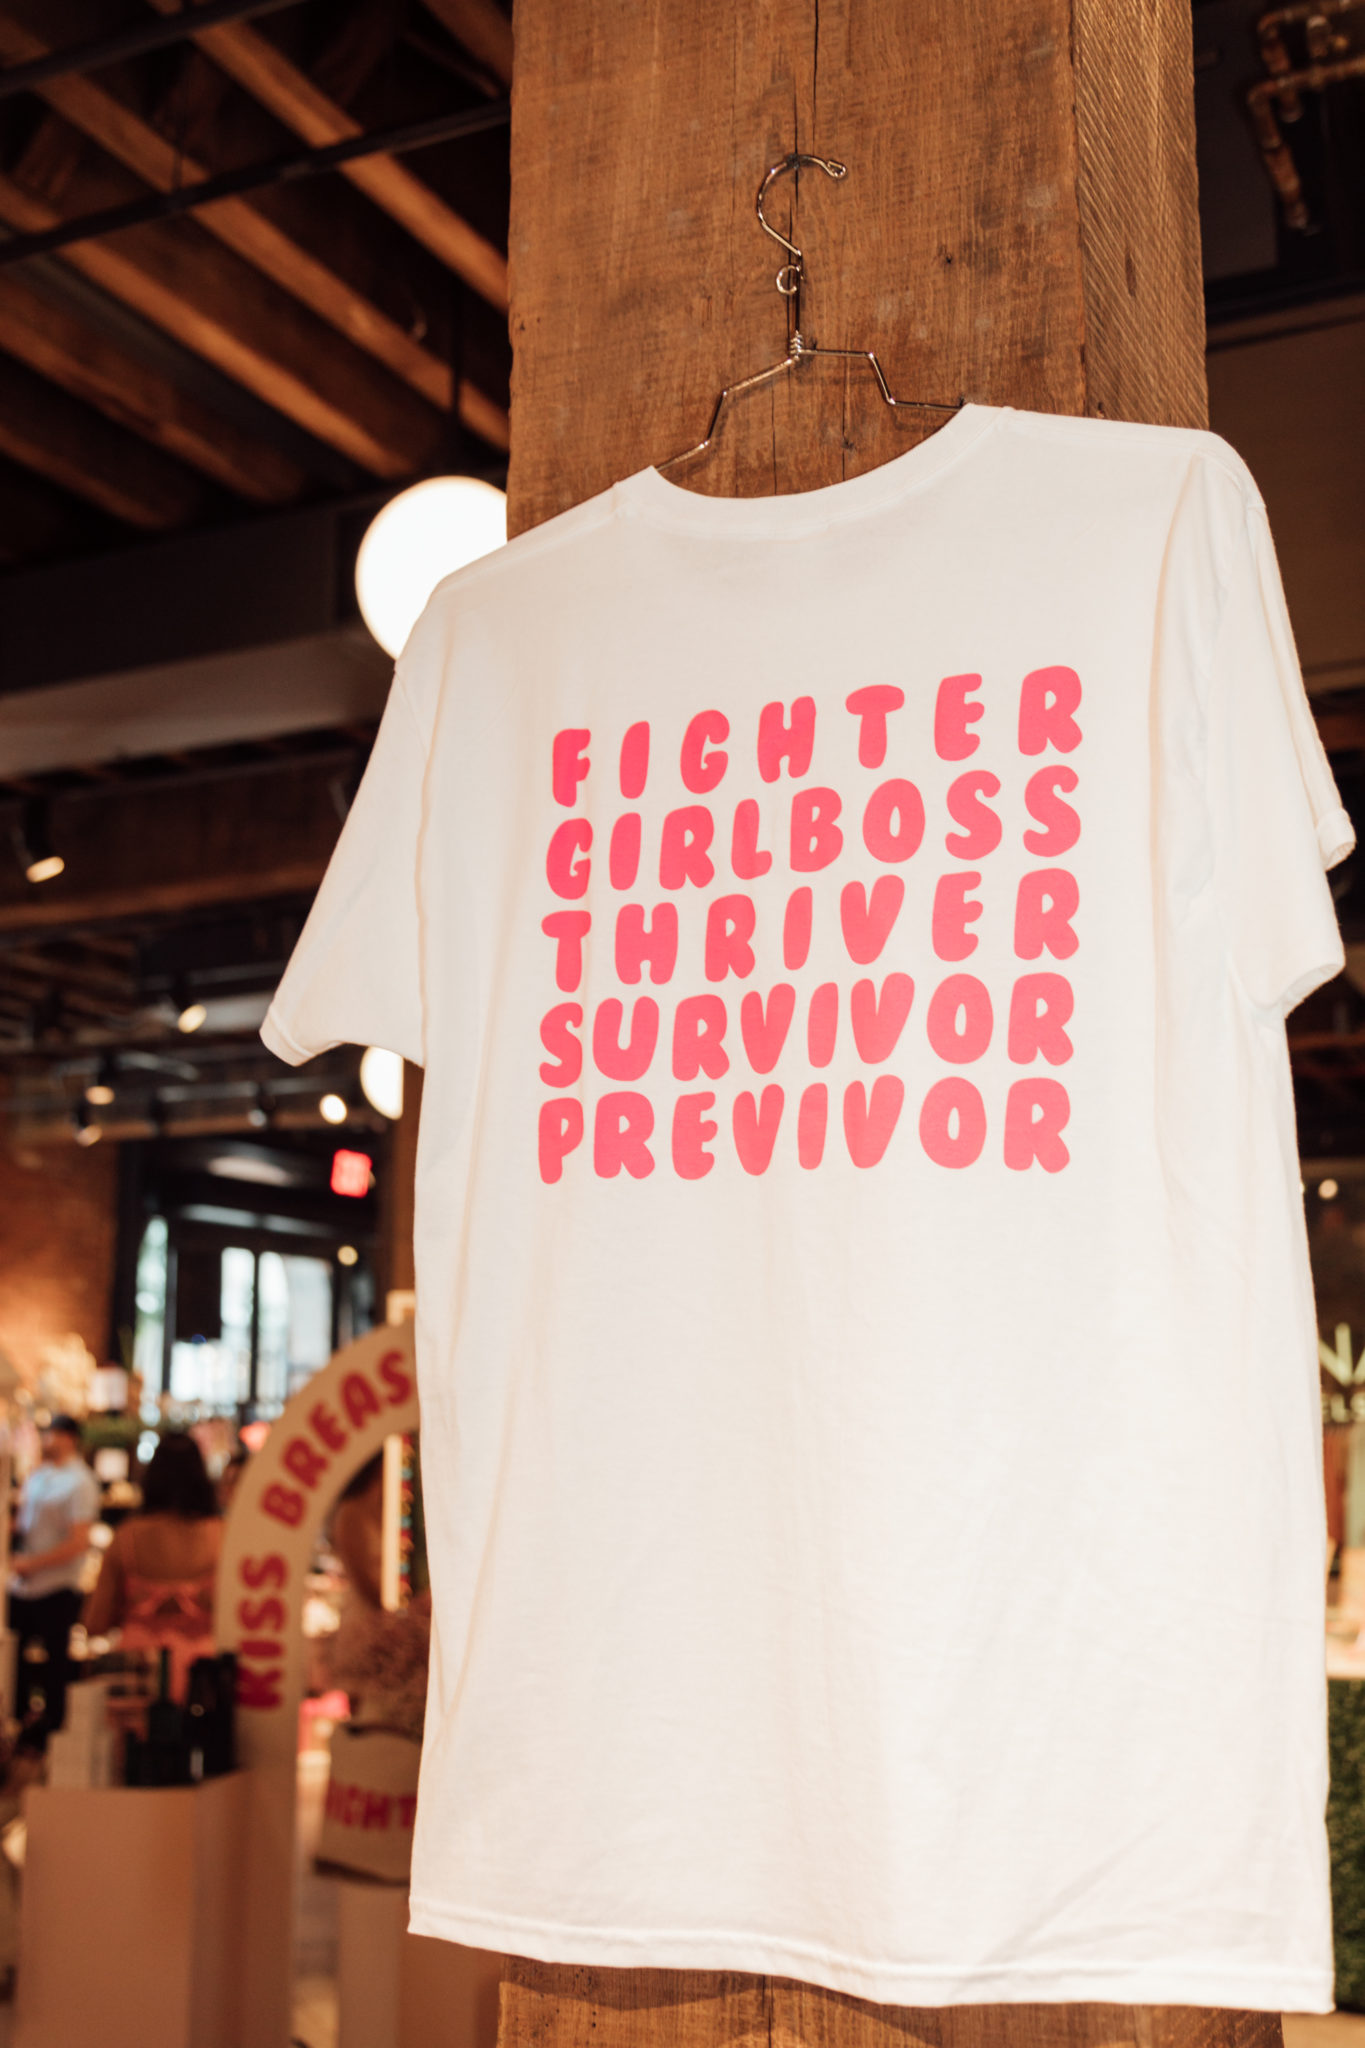 A white custom t-shirt, designed for a breast cancer awareness fundraiser. It features the words "fighter" "girl boss" "thriver" "survivor" and "previvor" on it in a bubblegum pink font.